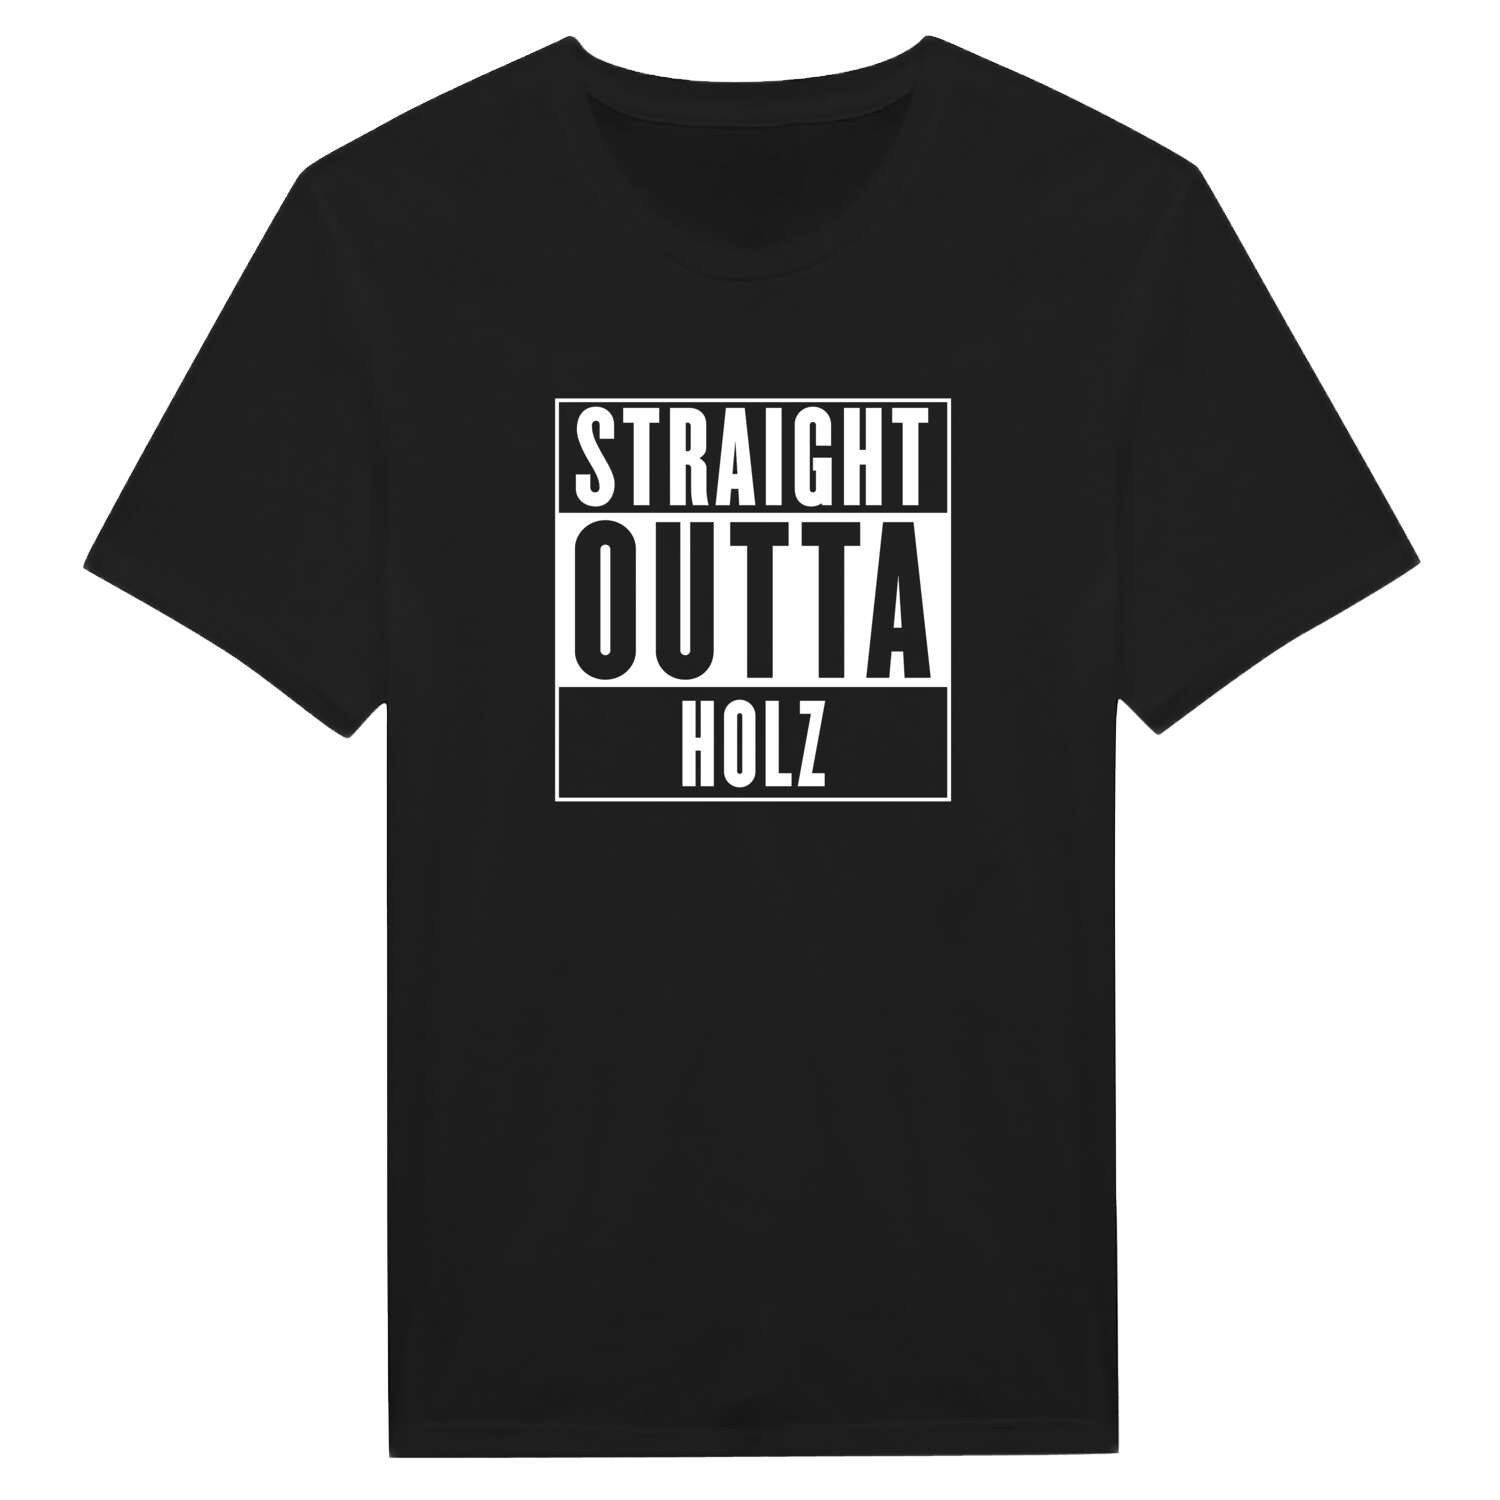 Holz T-Shirt »Straight Outta«